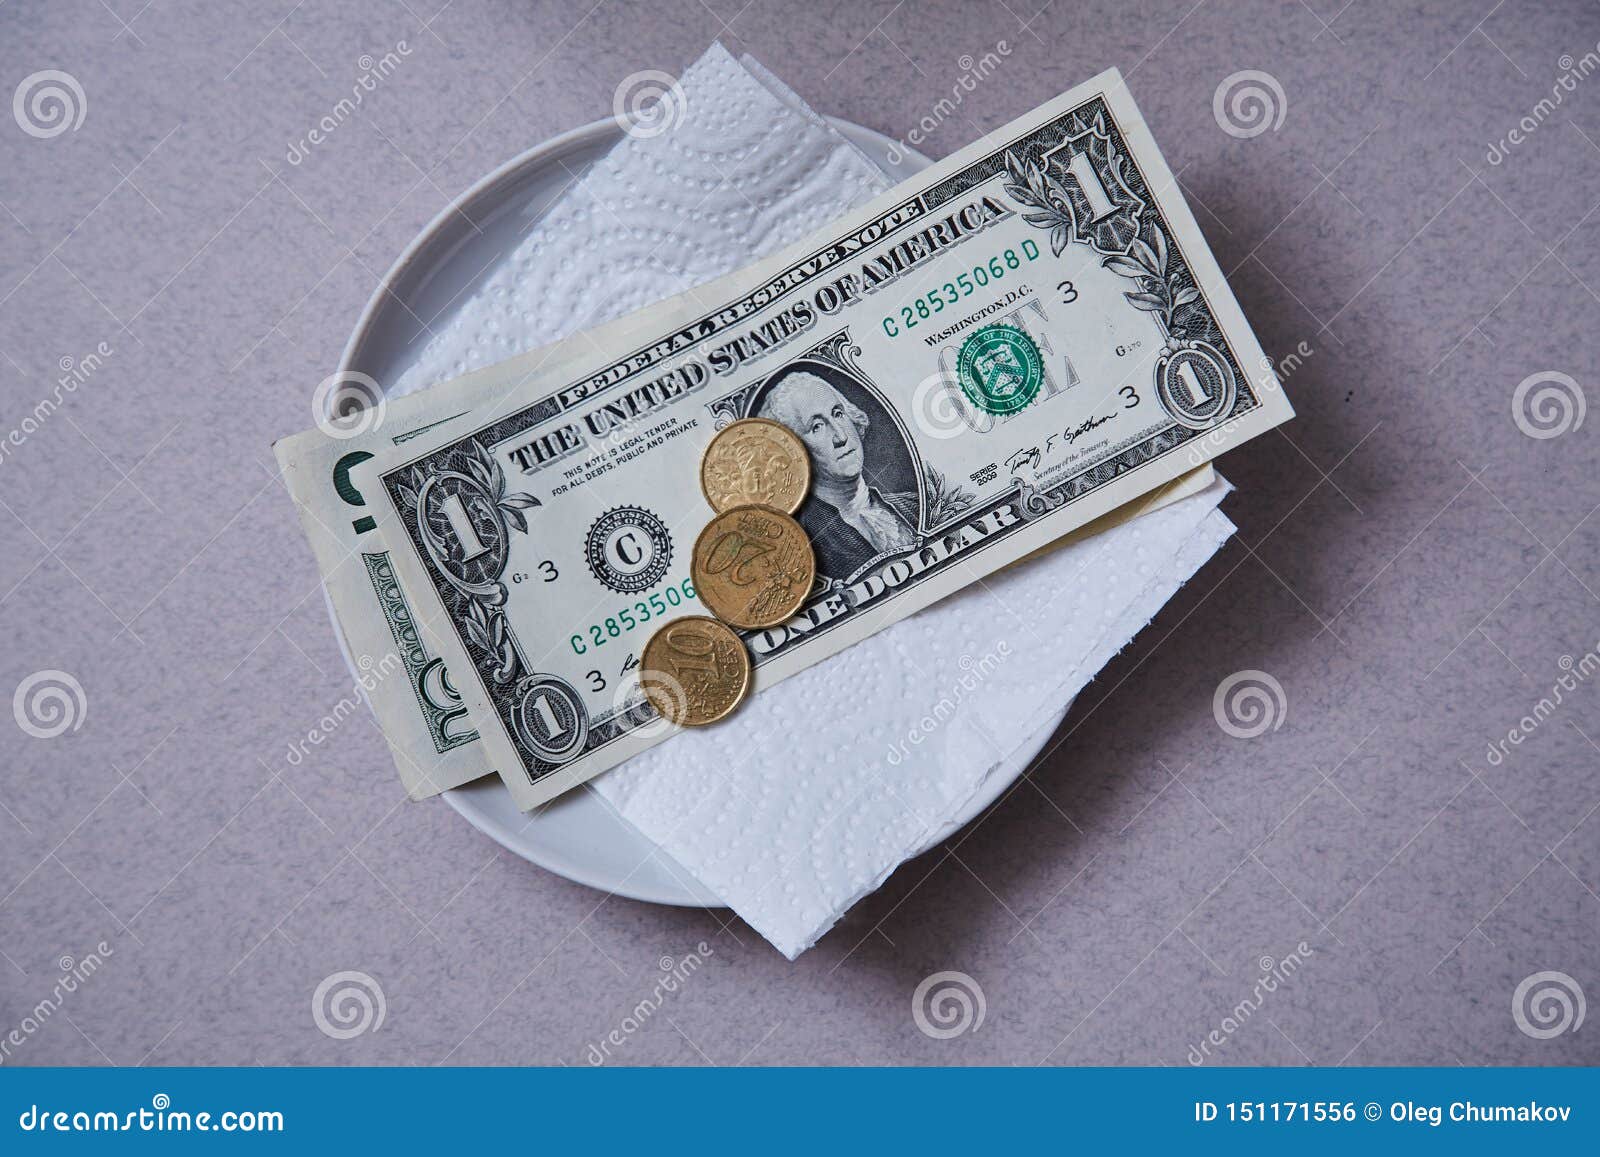 restaurant tips or gratuity. banknotes and coins on a plate